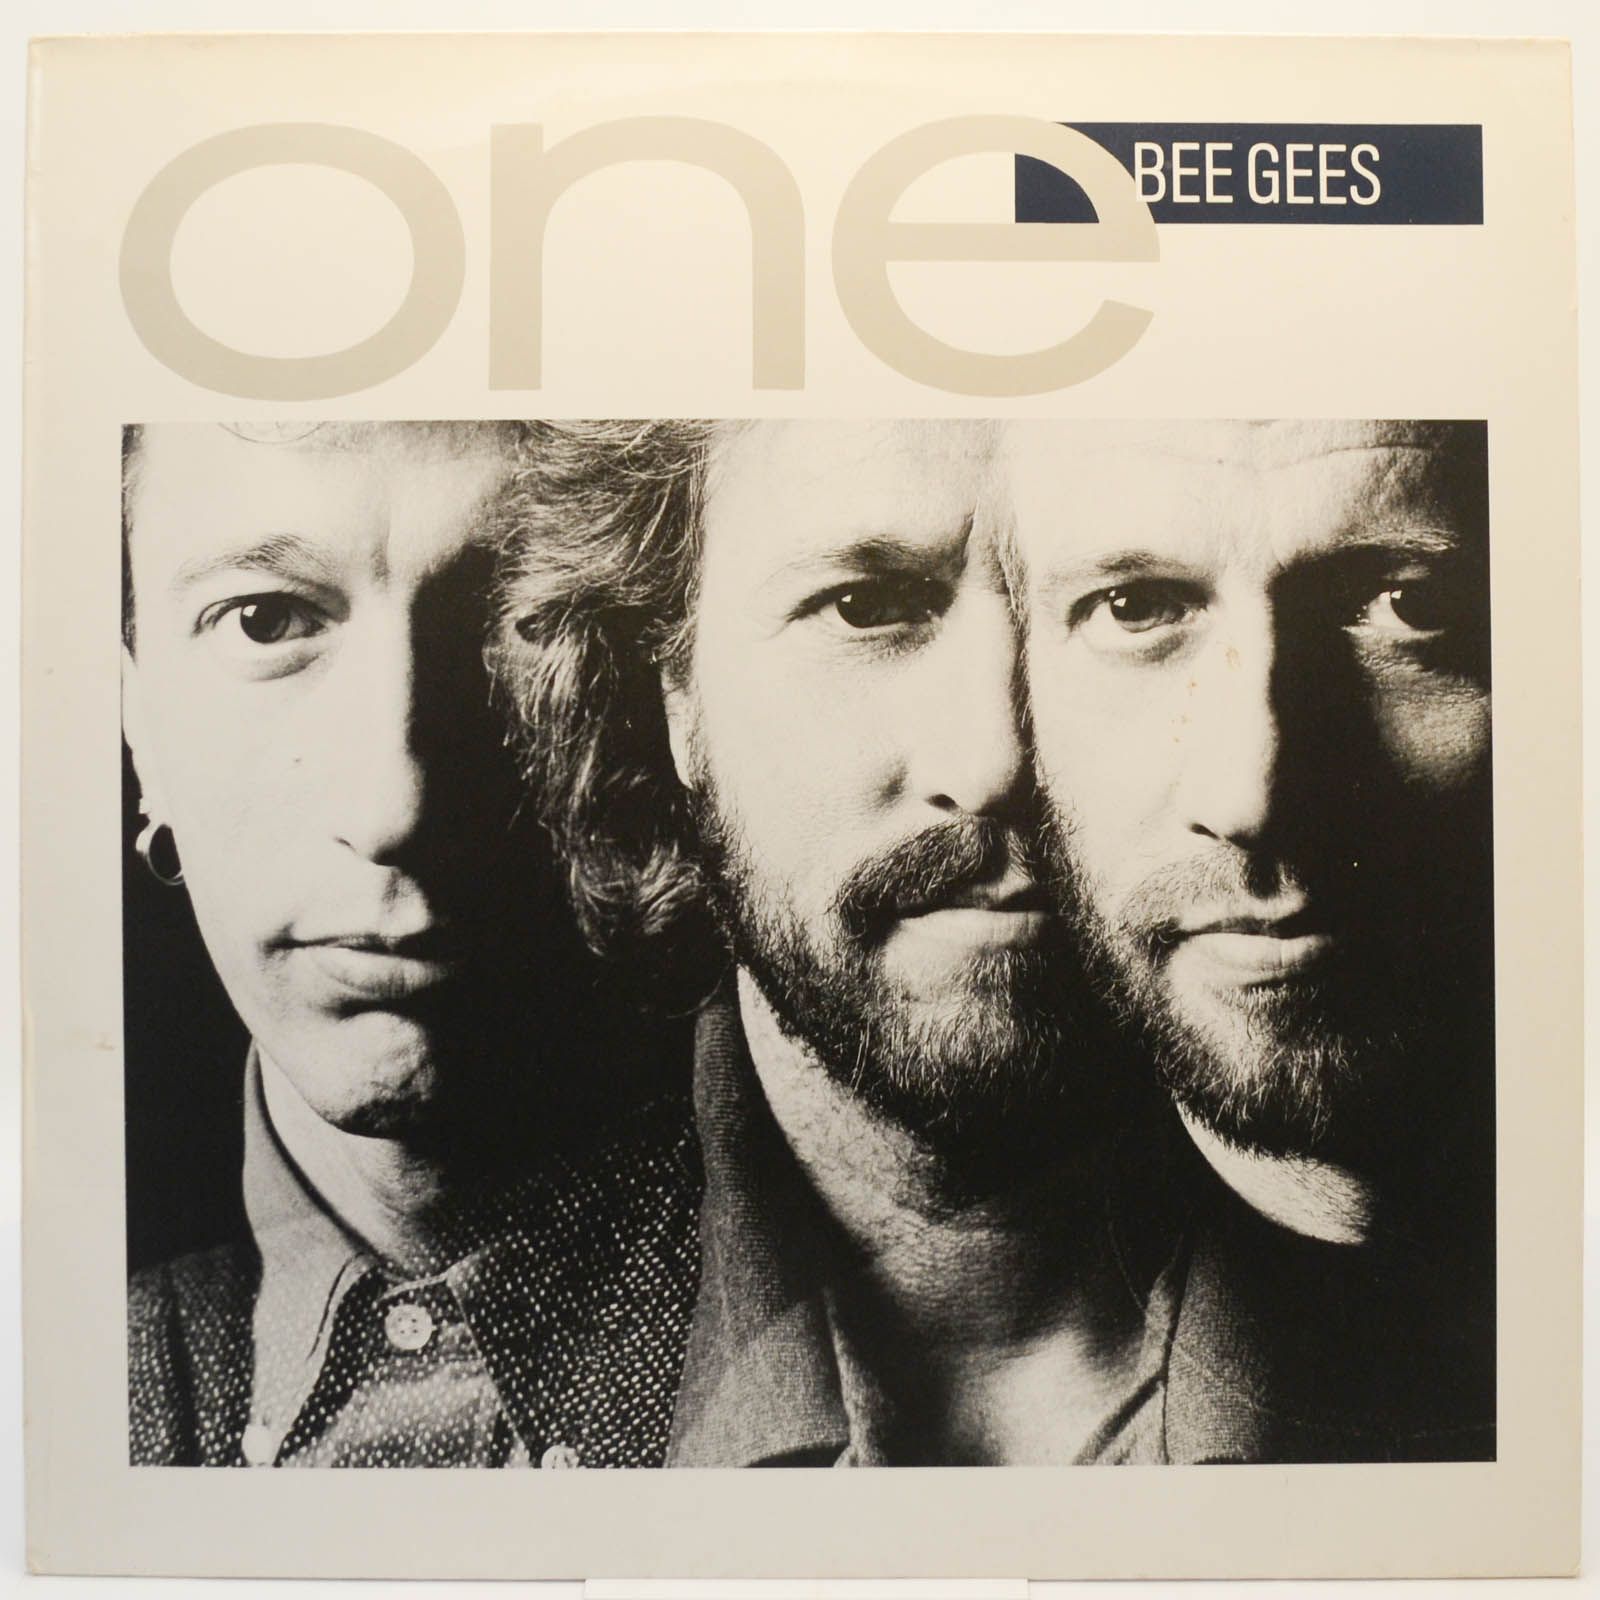 Bee Gees — One, 1989